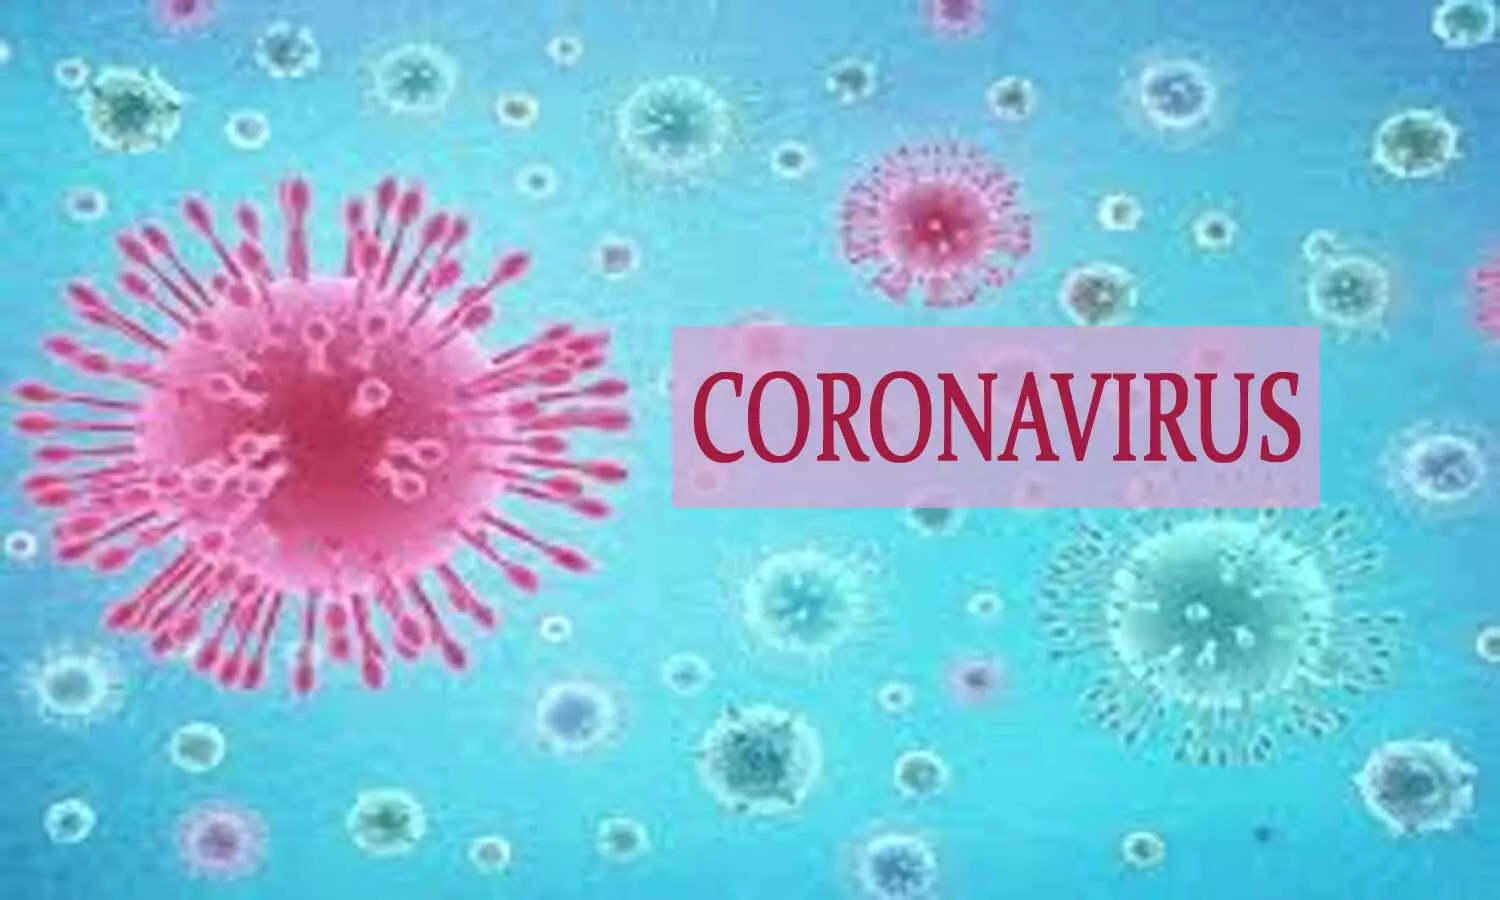 Men have double the death rate compared to women in  COVID-19 infection